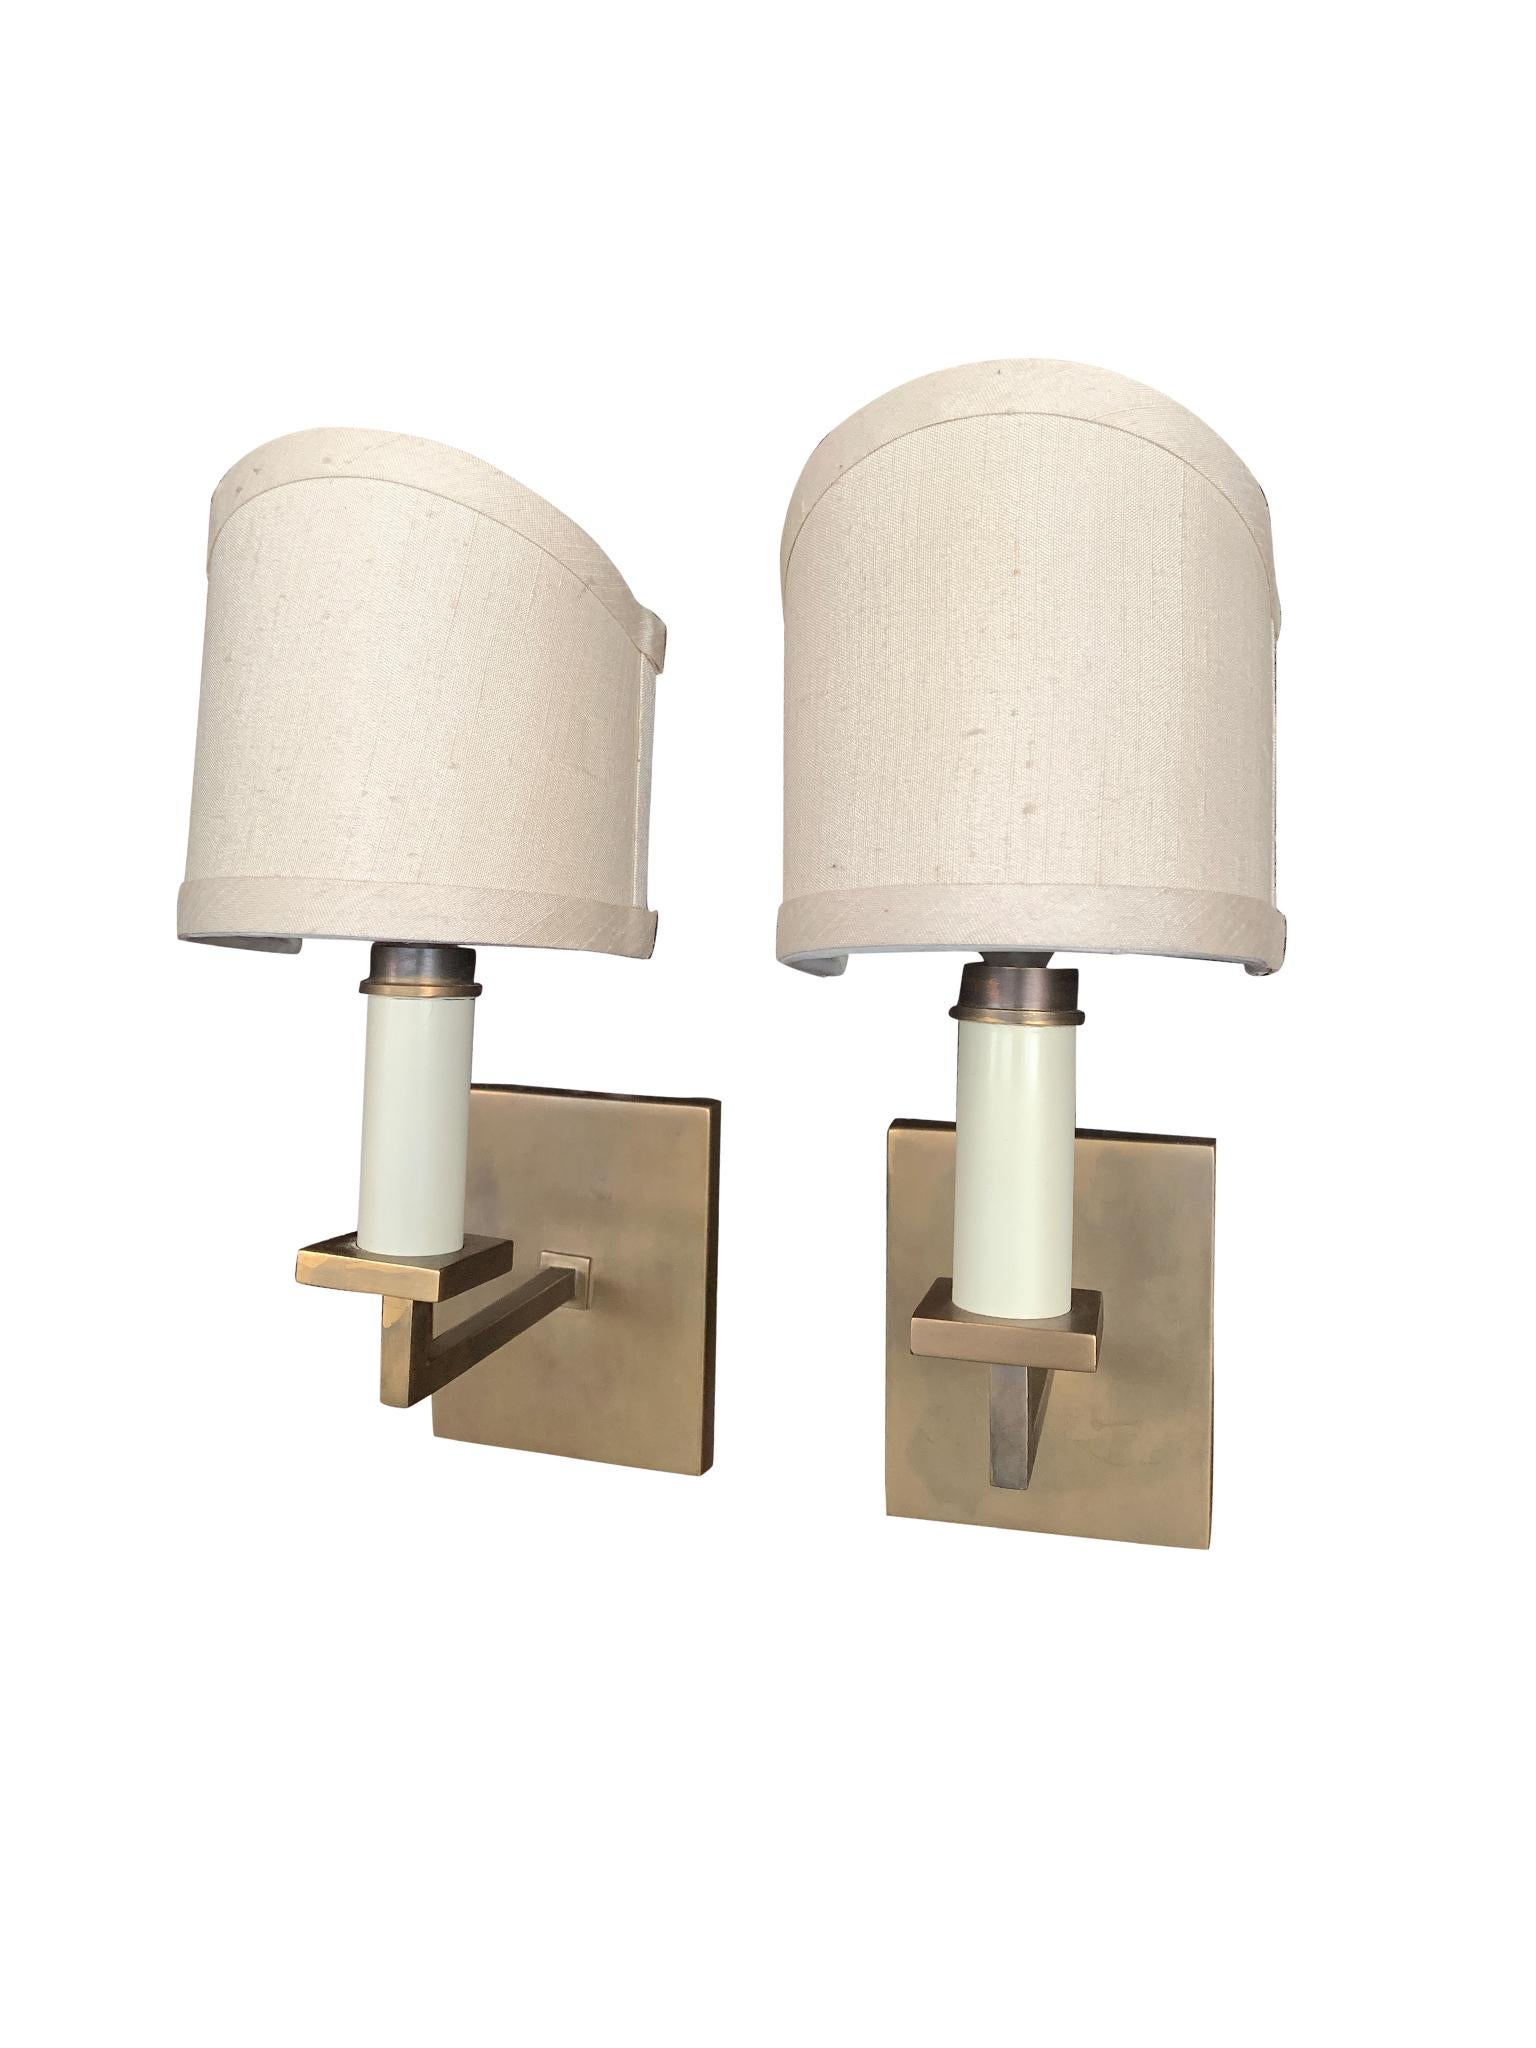 We love the simplicity of these sconces, made in the 1940s in France. They are brass with candelabra-style sockets. The shades are a recent addition. They have an elegant shield structure and are comprised of silk with a resin backing. These sconces